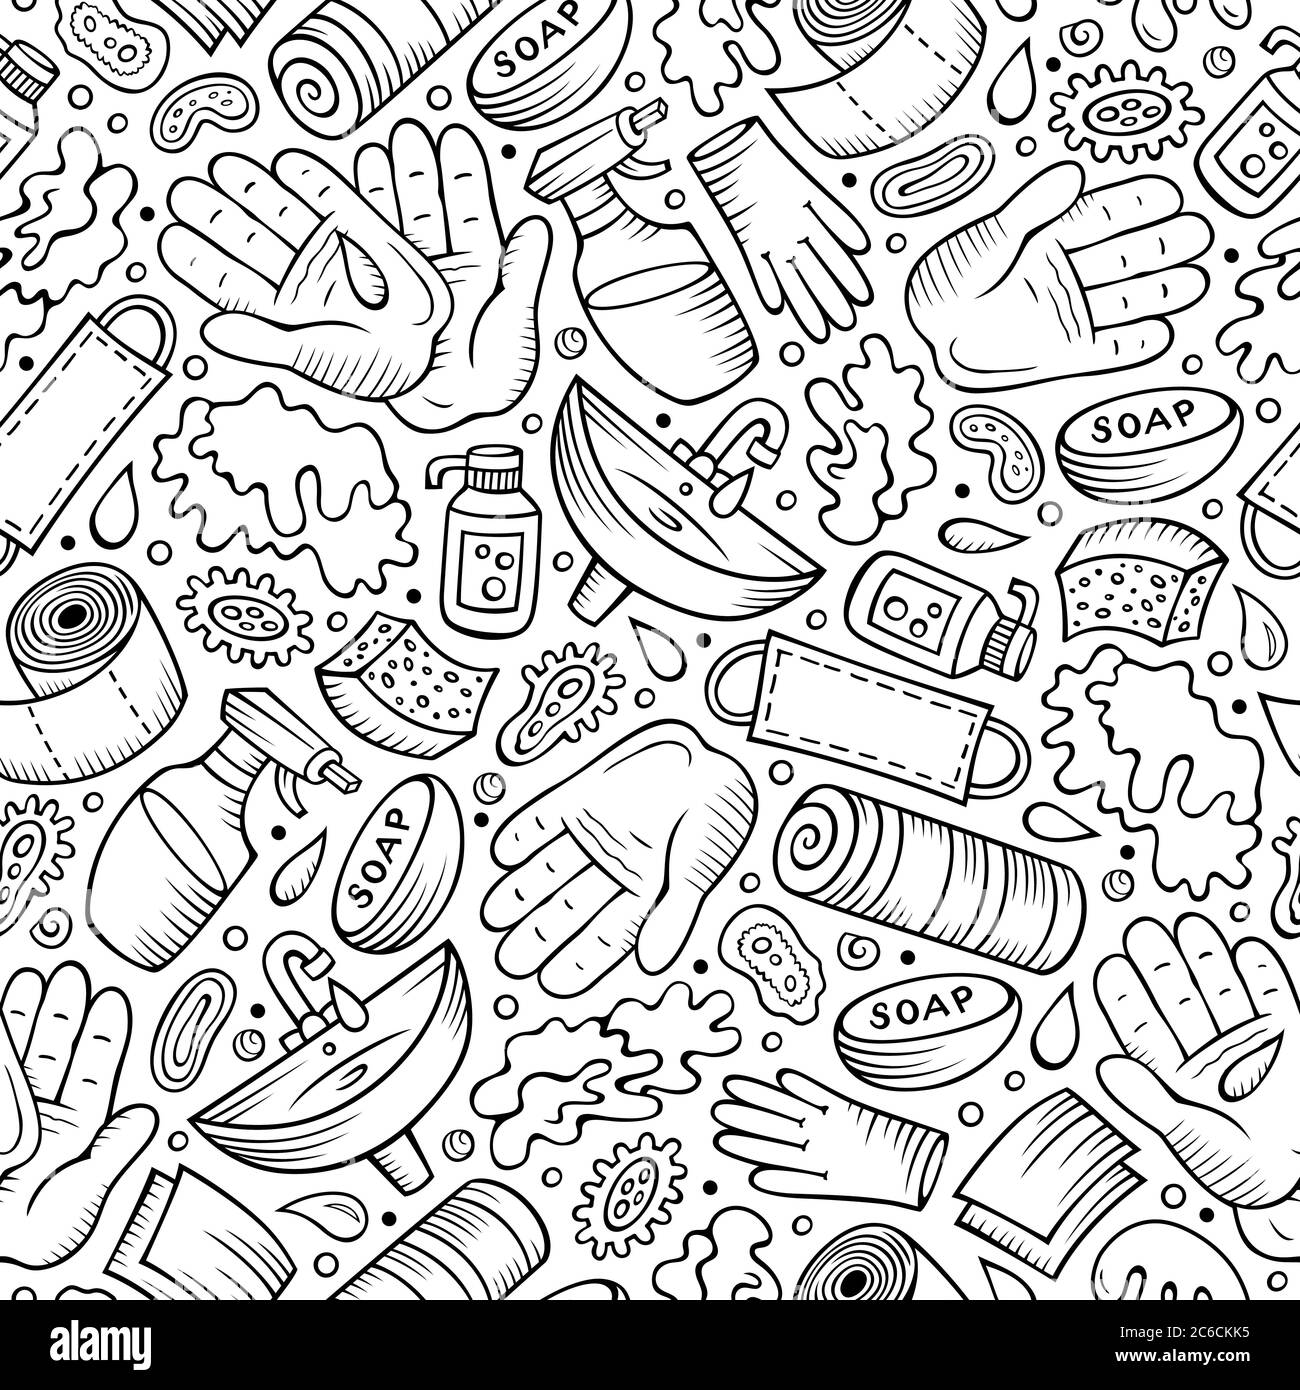 Hand wash hand drawn doodles seamless pattern. Protective measures background. Stock Vector